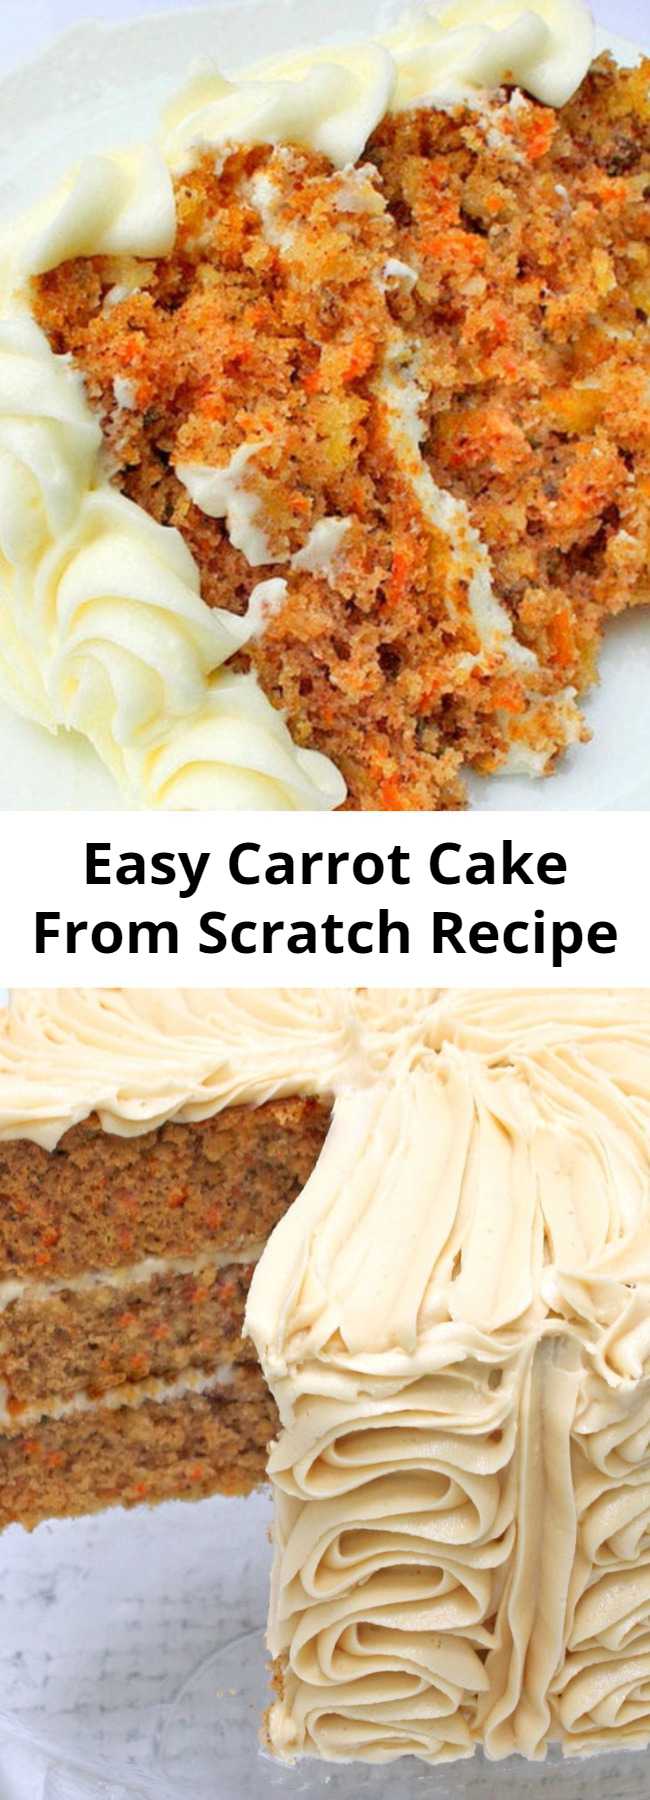 Easy Carrot Cake From Scratch Recipe - This scratch Carrot Cake is my FAVORITE cake, and one of our most popular recipes on the site! Carrot cake with crushed pineapple, pecans, coconut, and spices!